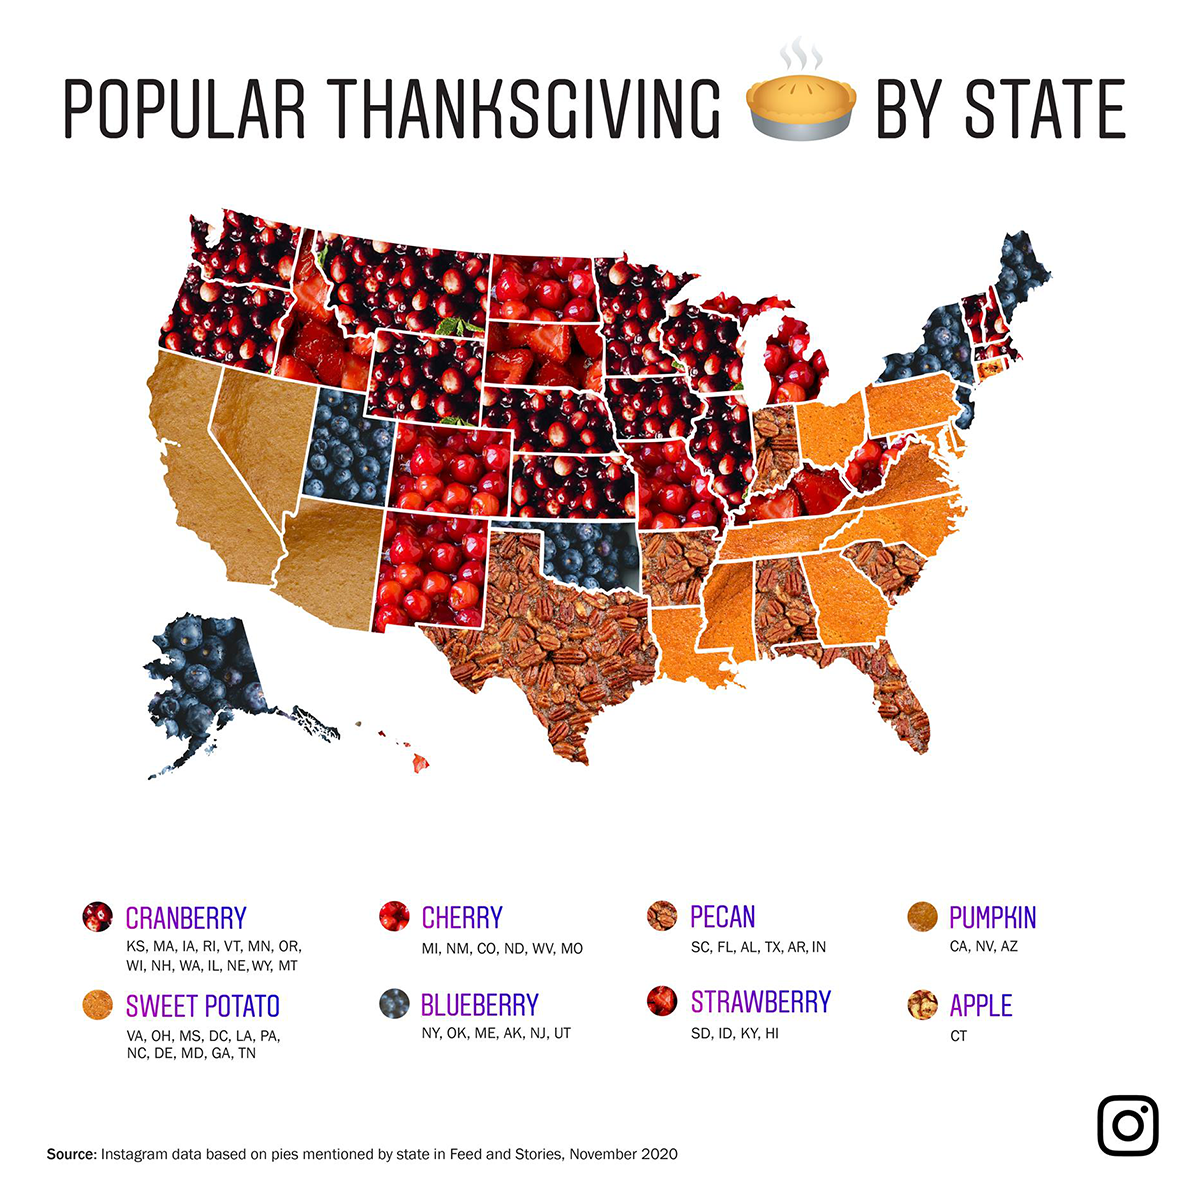 Most Popular Thanksgiving Pie in Each State